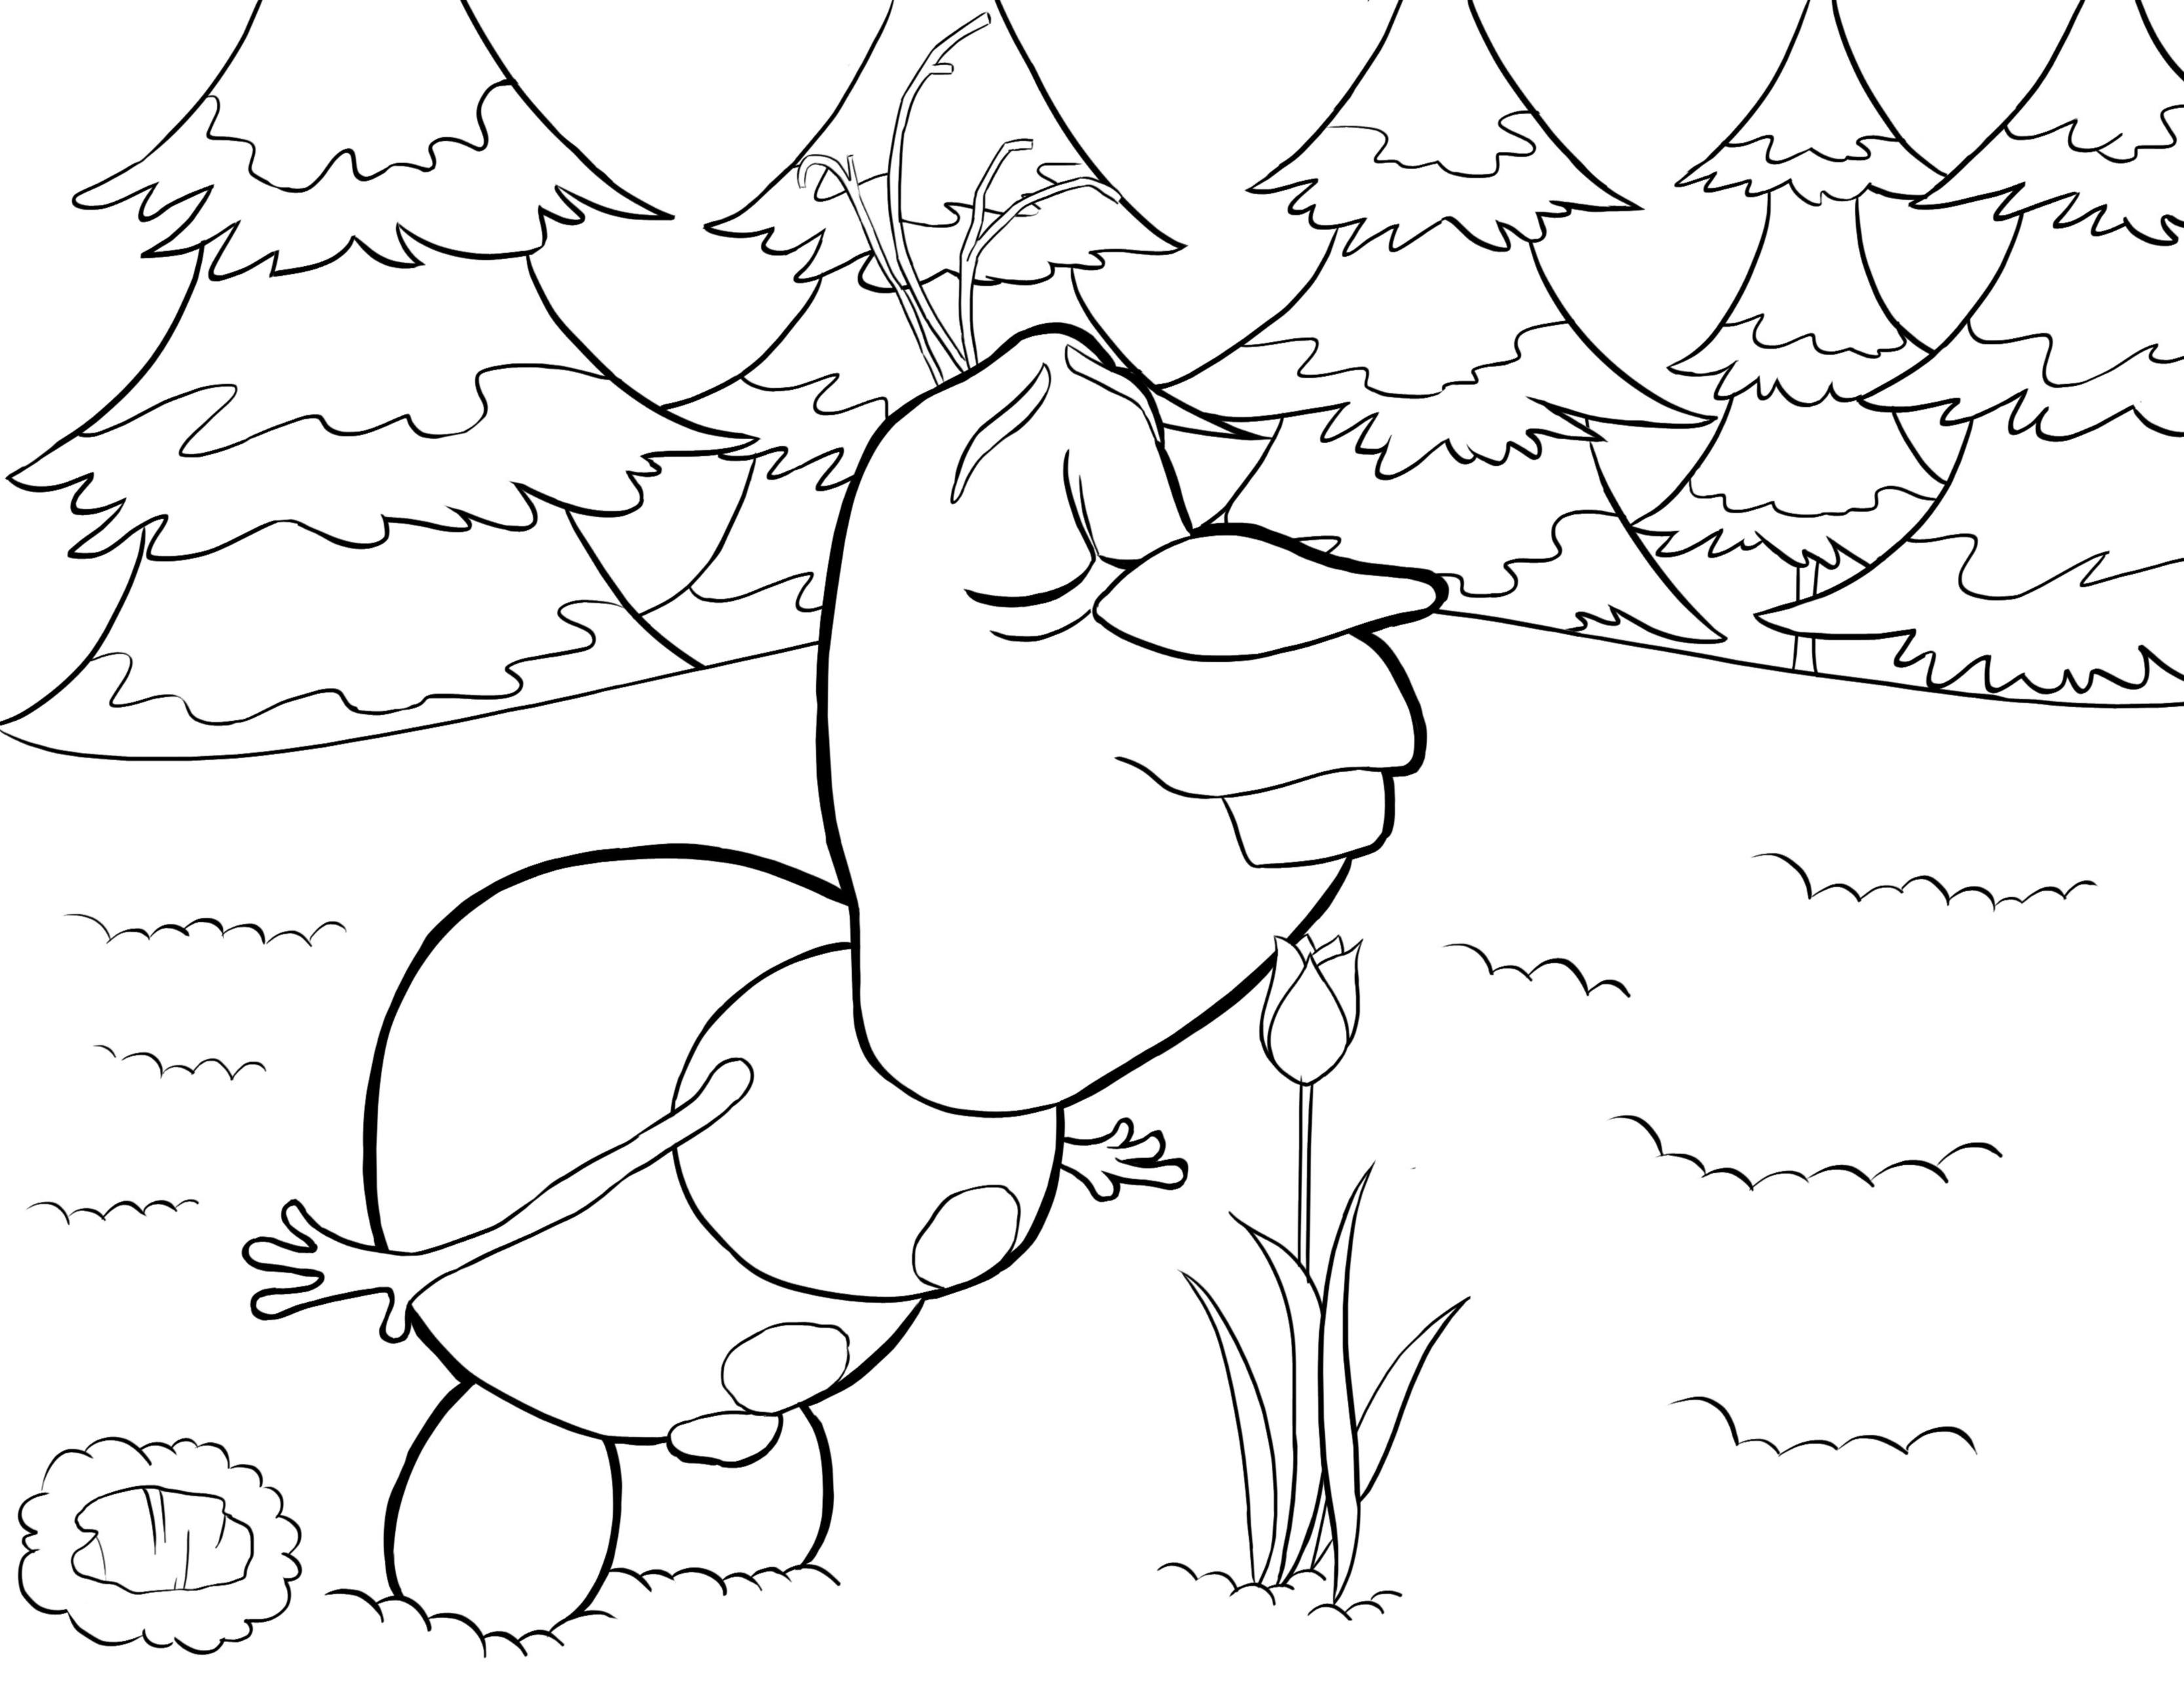 Frozen coloring page to download for free : Olaf loves flowers